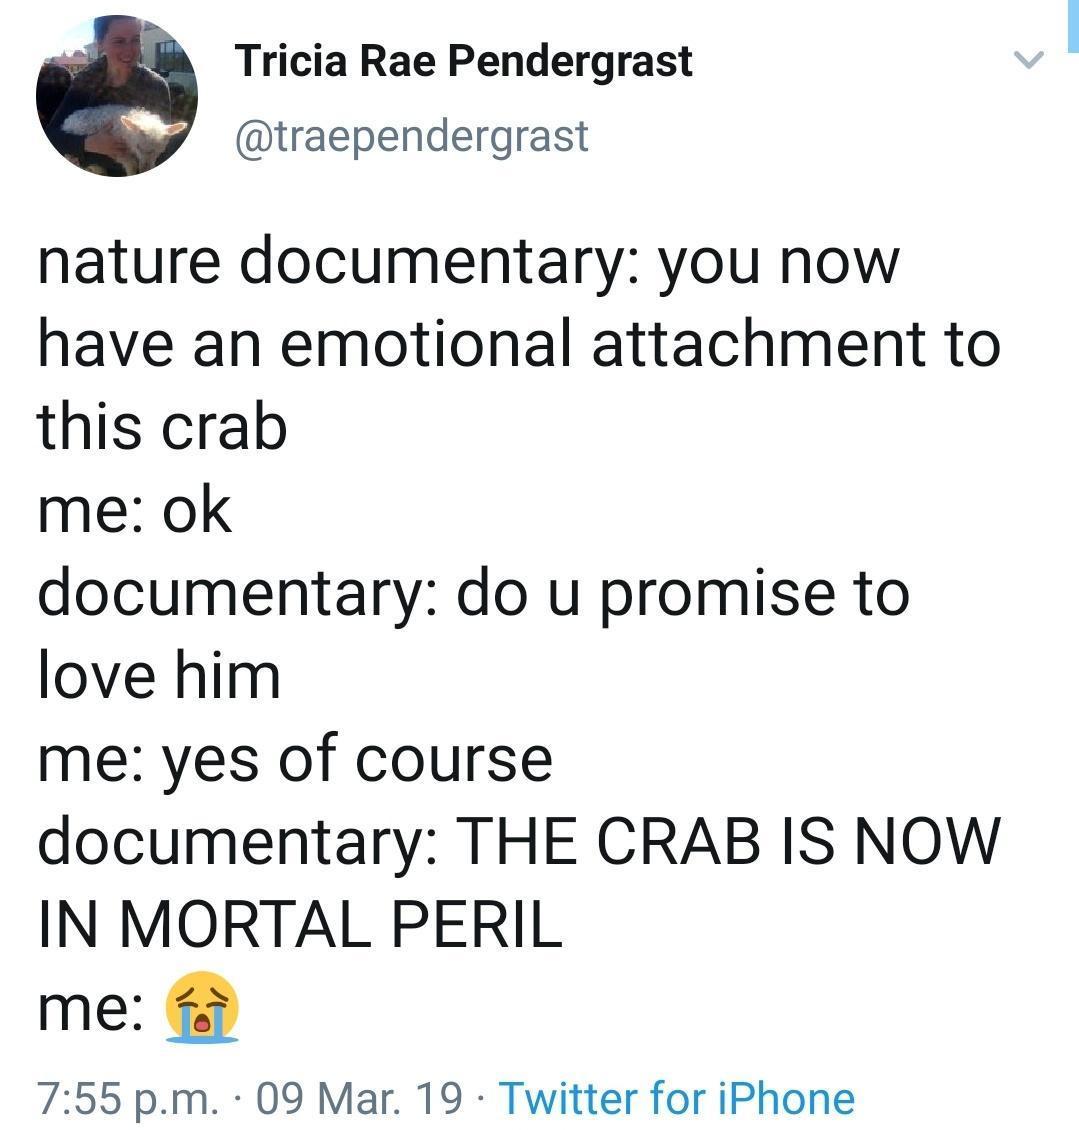 angle - Tricia Rae Pendergrast nature documentary you now have an emotional attachment to this crab me ok documentary do u promise to love him me yes of course documentary The Crab Is Now In Mortal Peril me fi p.m. 09 Mar. 19. Twitter for iPhone